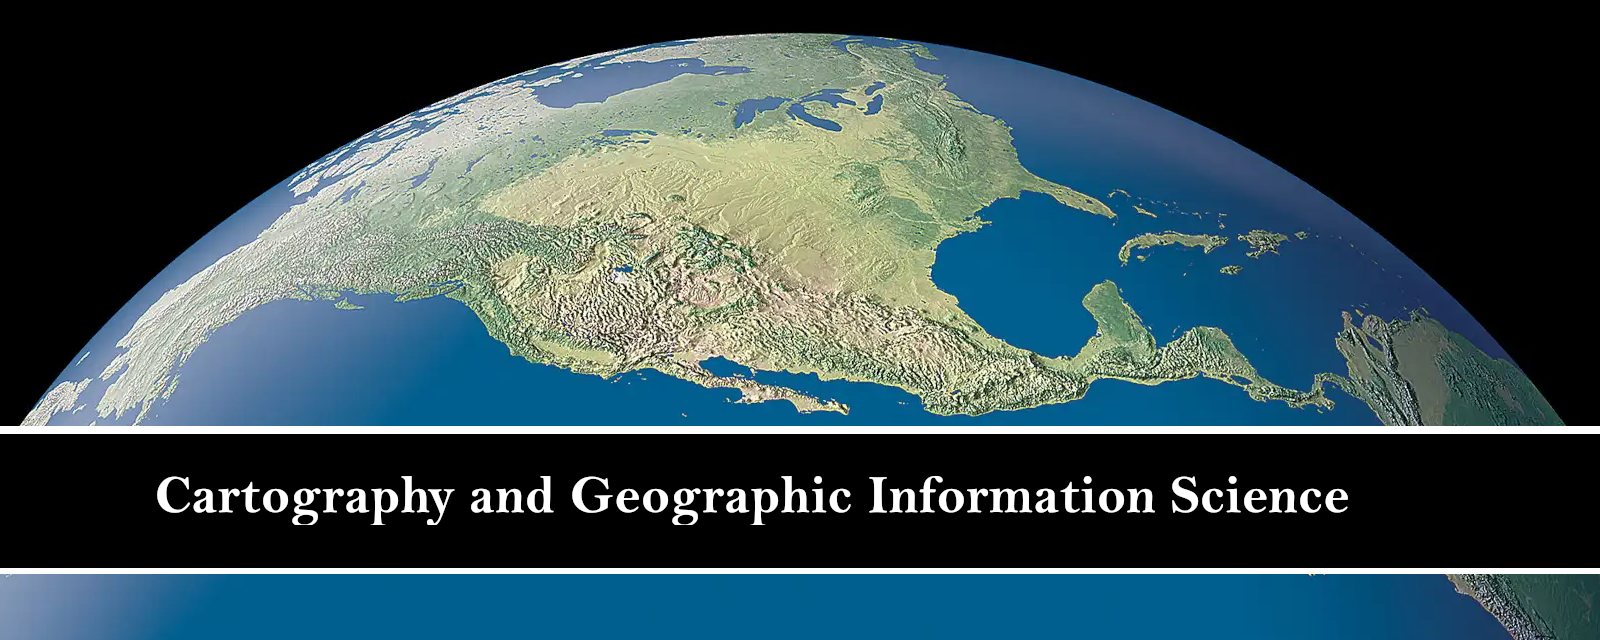 Cartography and Geographic Information Science 3